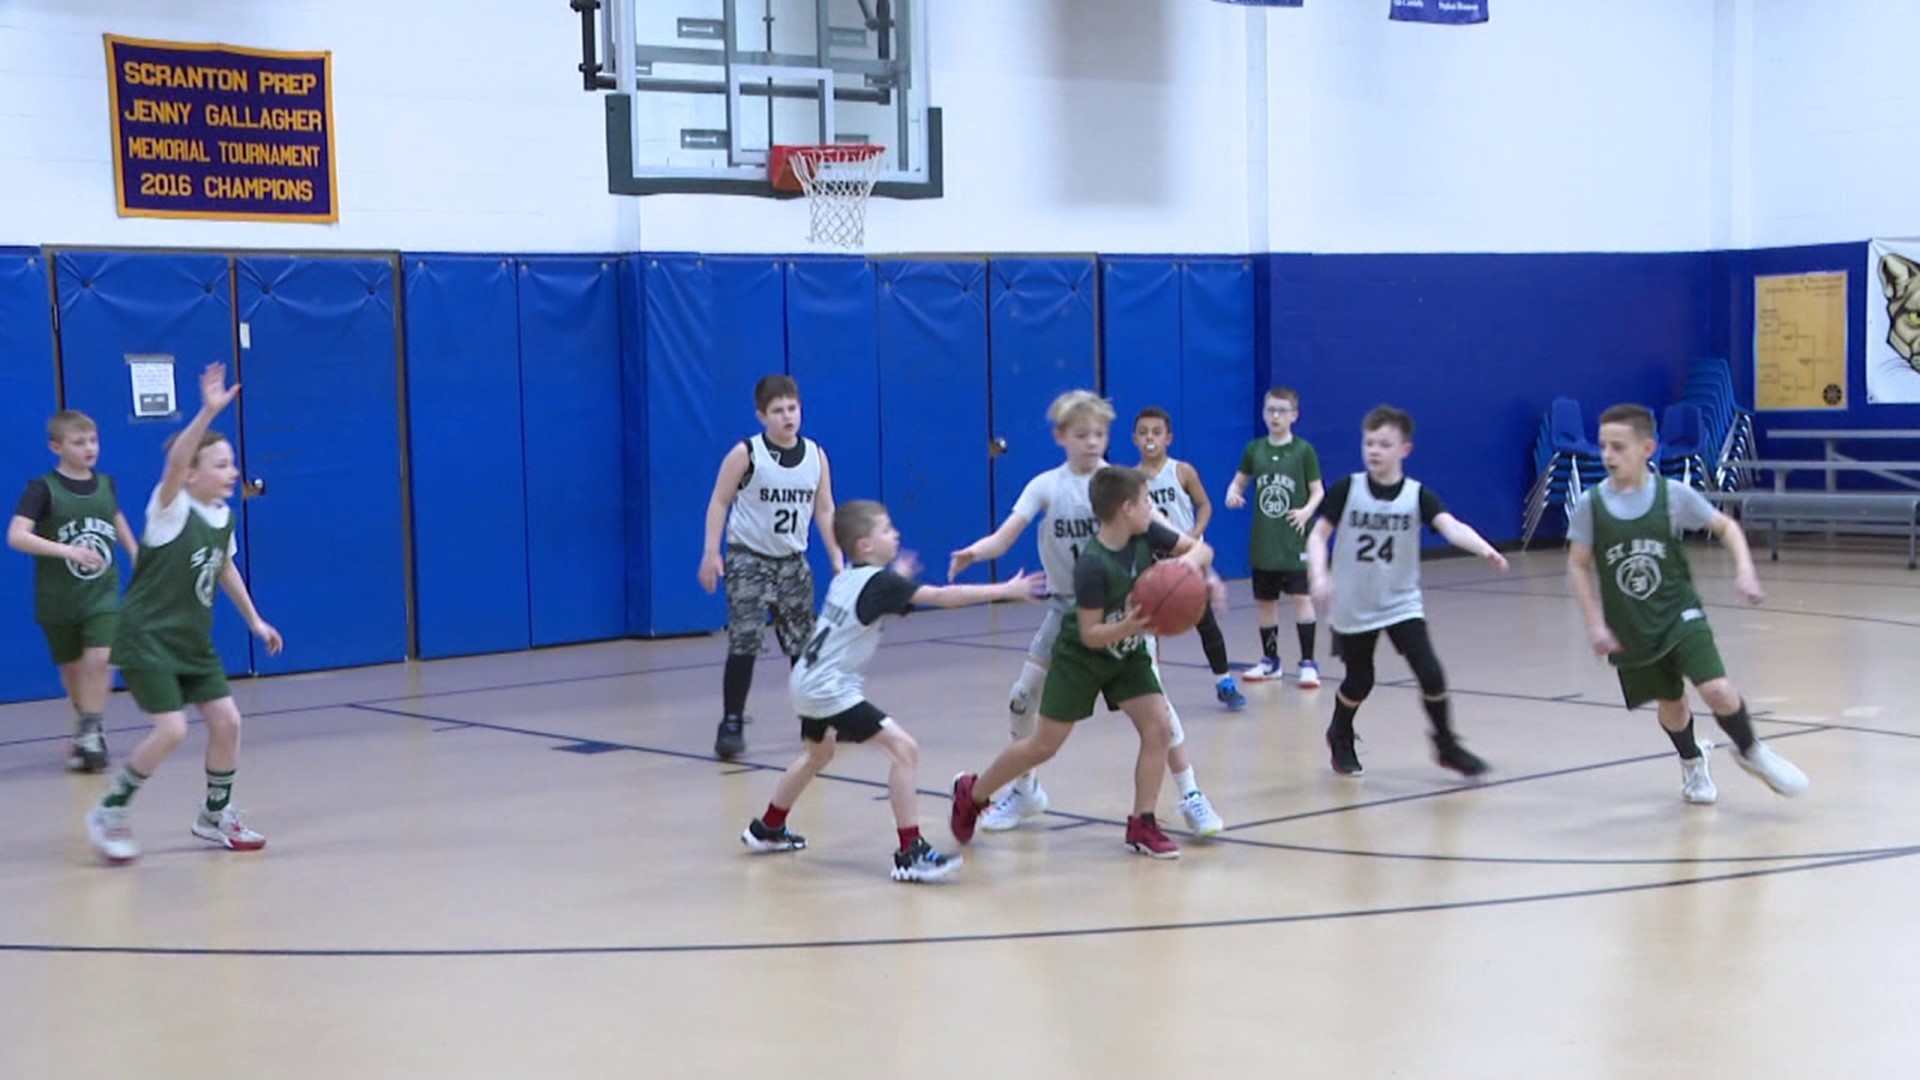 A group of young athletes got their March Madness on at Wyoming Area Catholic School in Exeter Saturday afternoon.